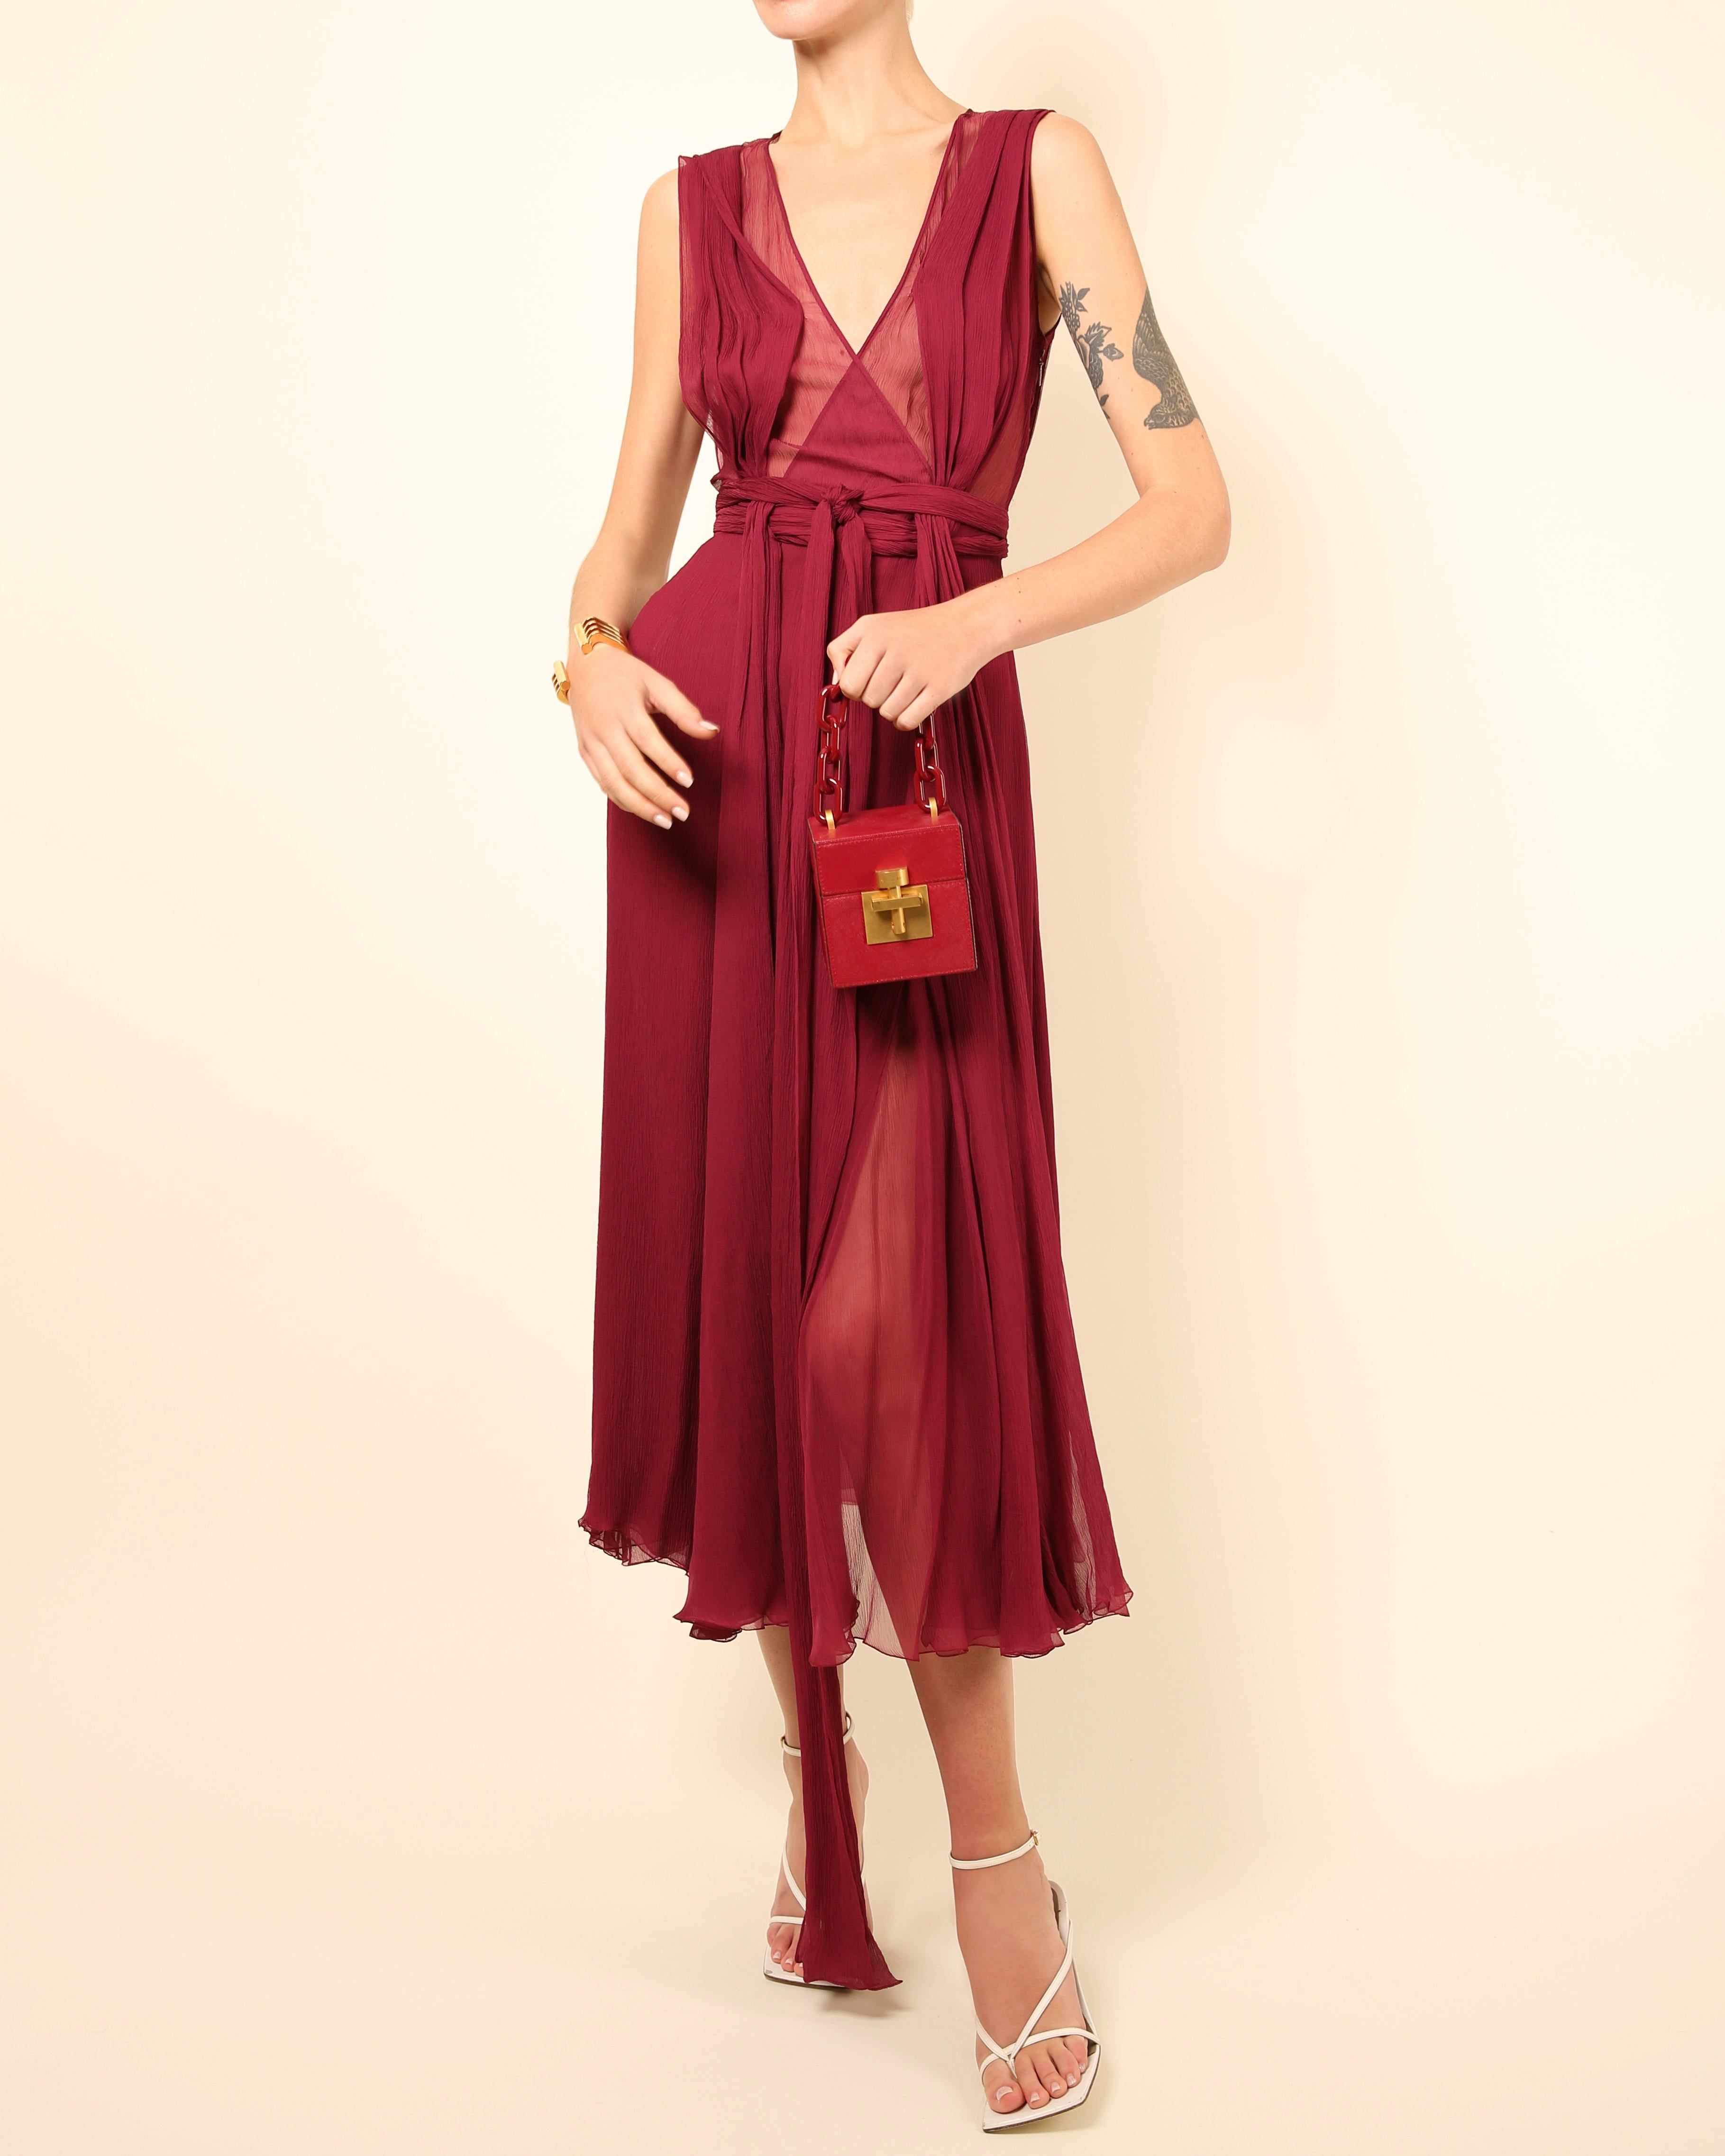 Gucci Fall 2011 burgundy chiffon silk plunging neckline sheer cut out gown dress In Good Condition For Sale In Paris, FR